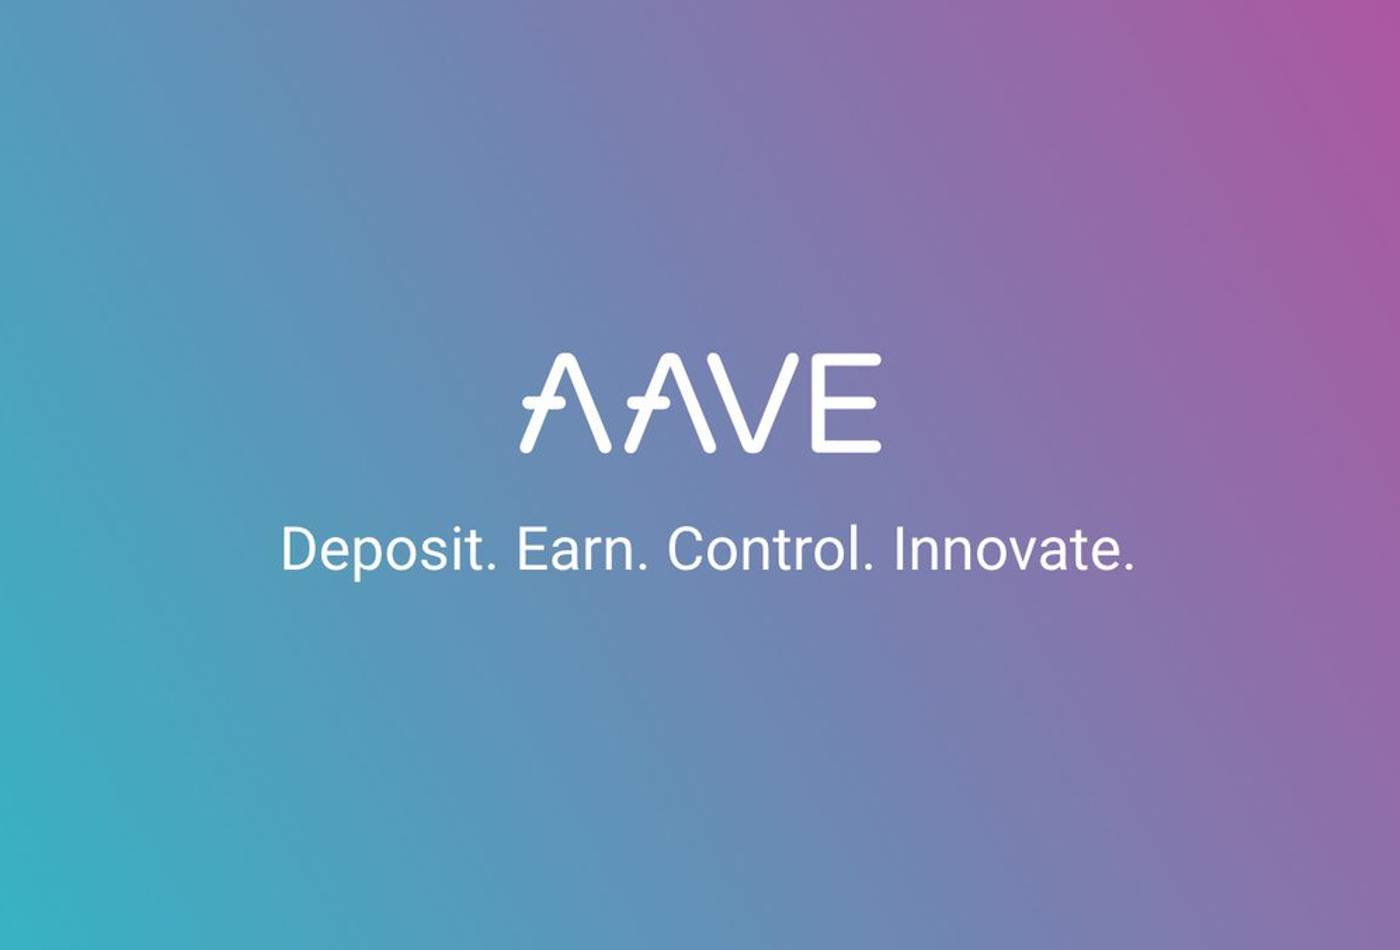 Aave (AAVE) Price Prediction 2022-2030: The Best Time To Buy